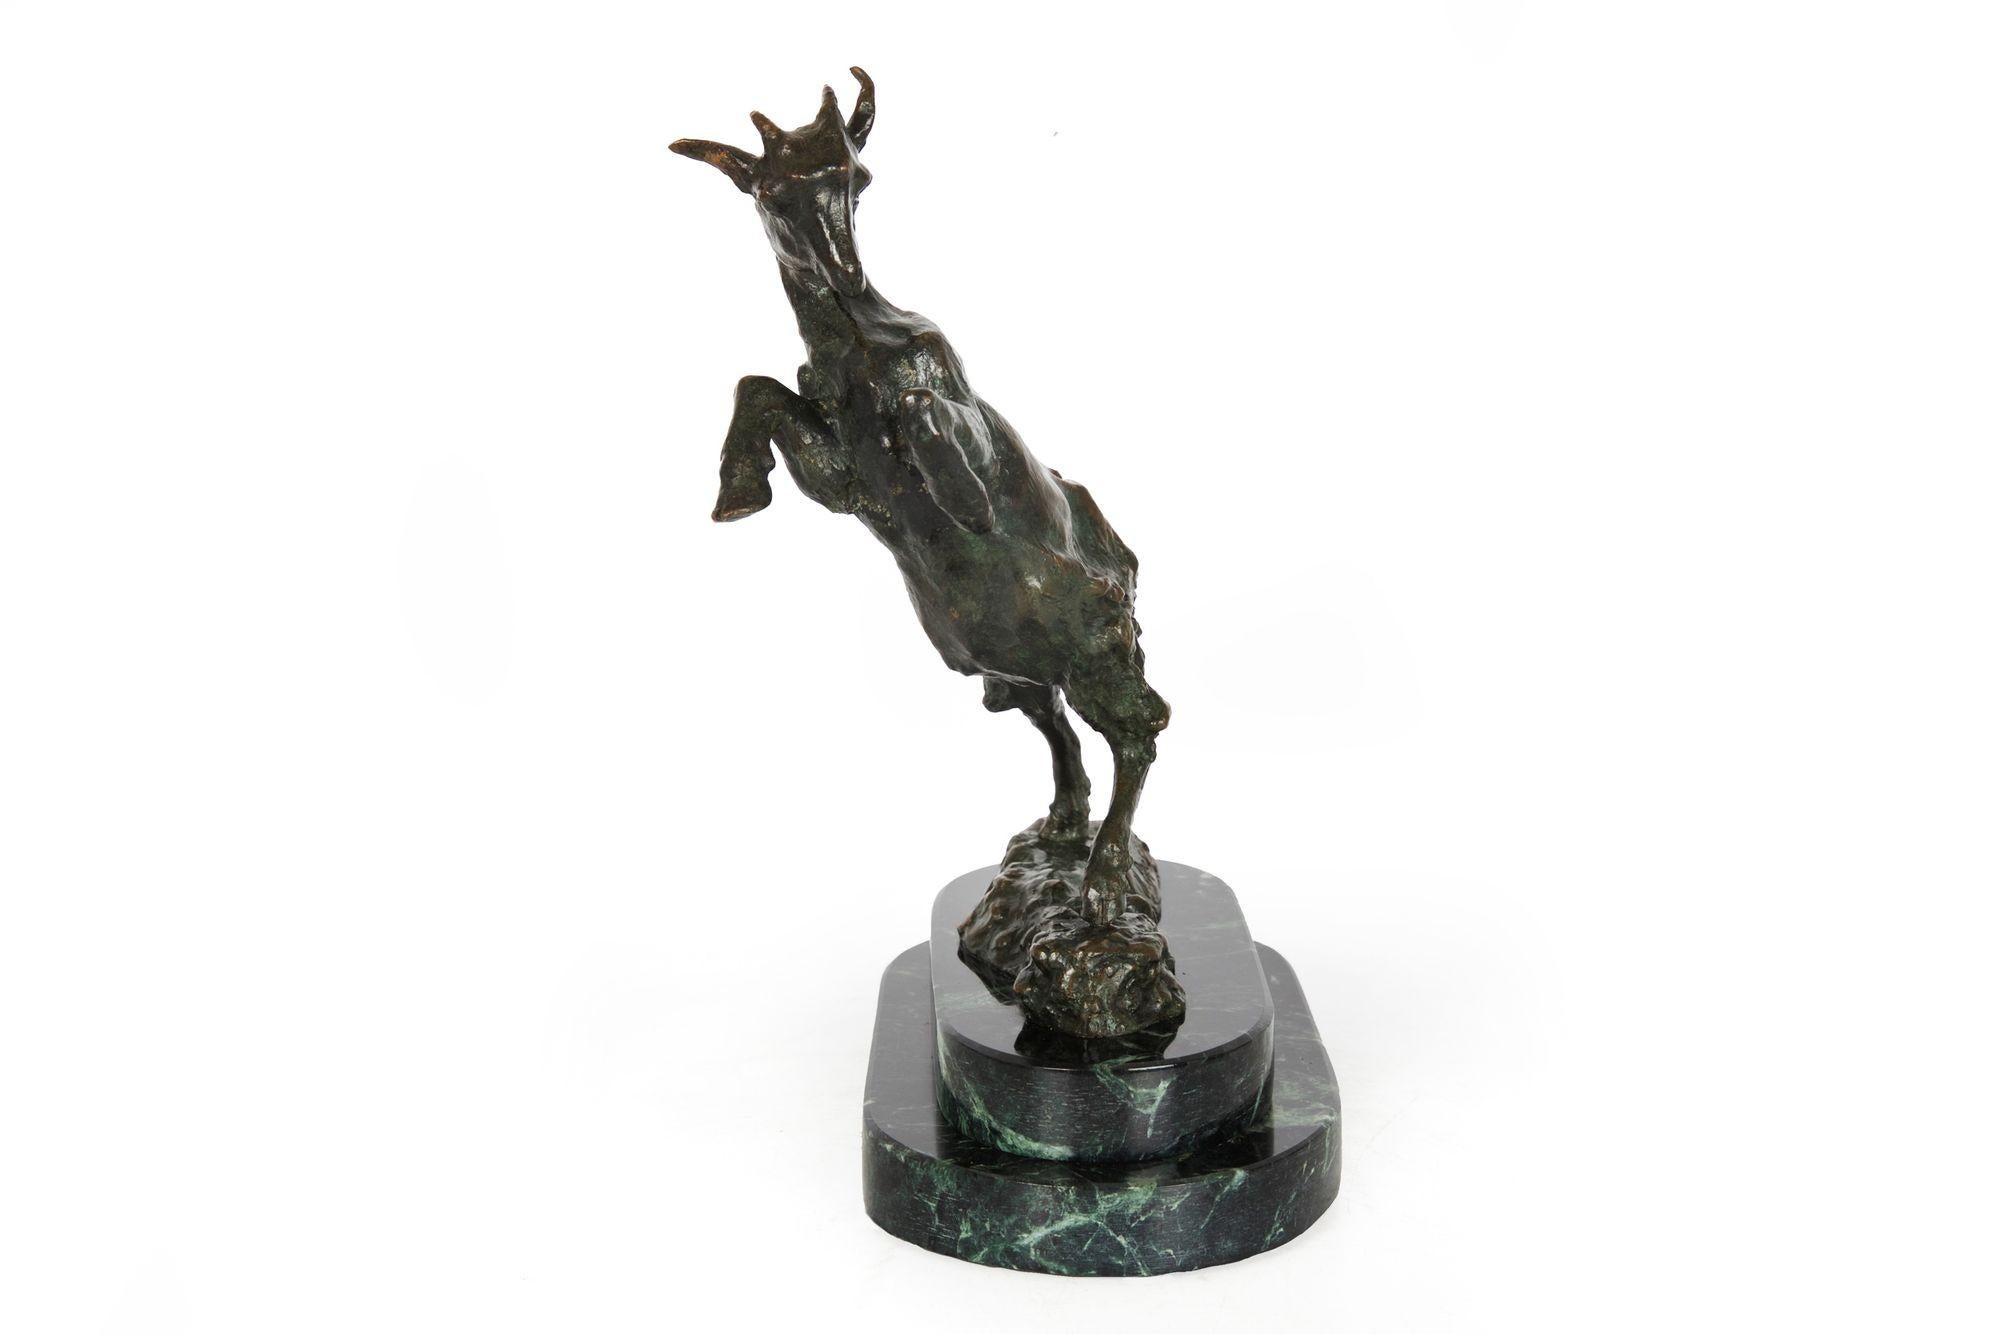 20th Century French Art Deco Bronze Sculpture of “Jumping Goat”, Bookend by Maurice Prost